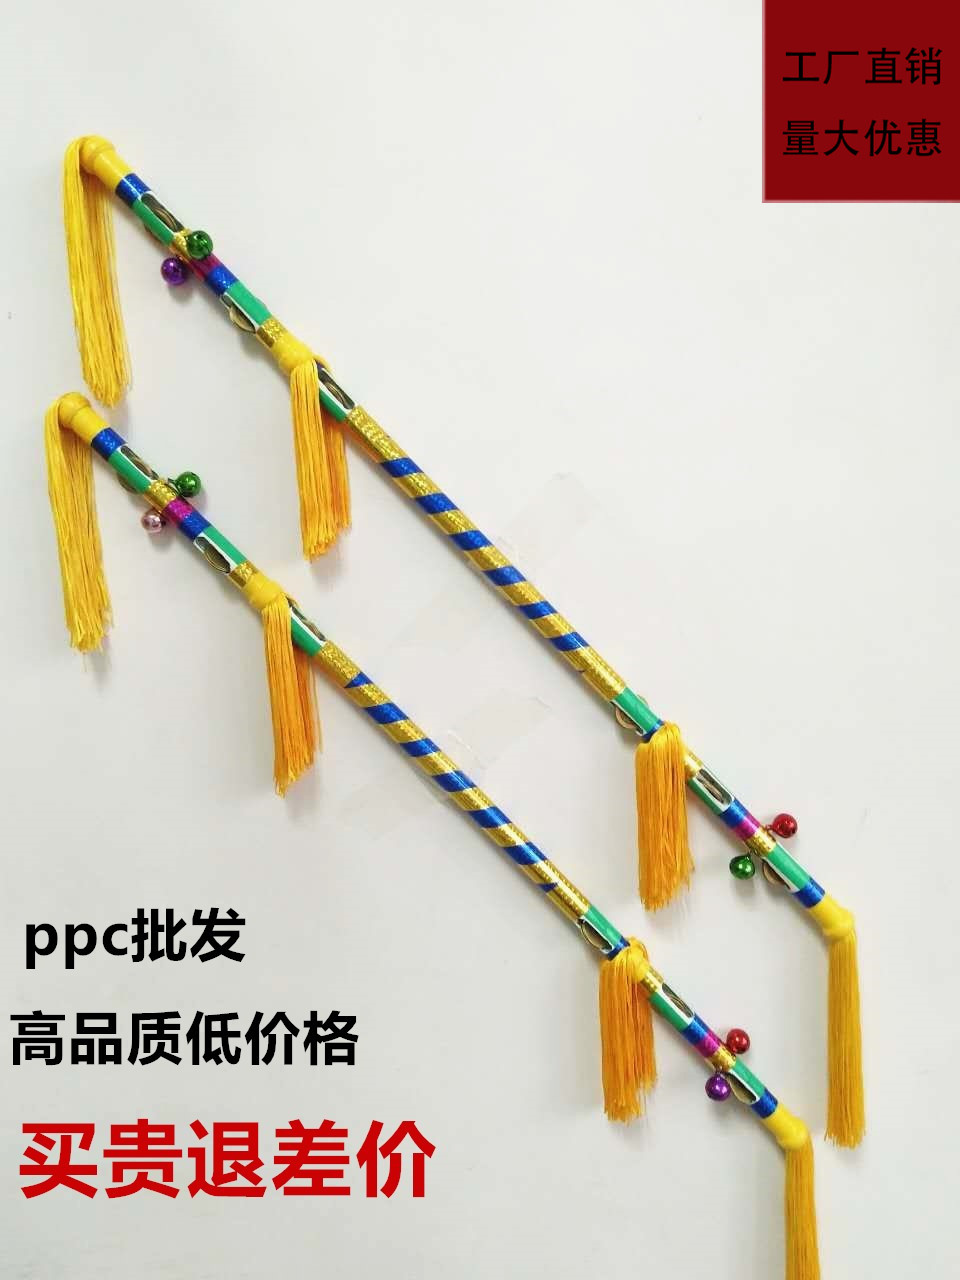 New PPR PC tube plastic square dance playing money rod continuous sound flower stick Lotus Xiang Dance tyrannical whip money stick lotus box